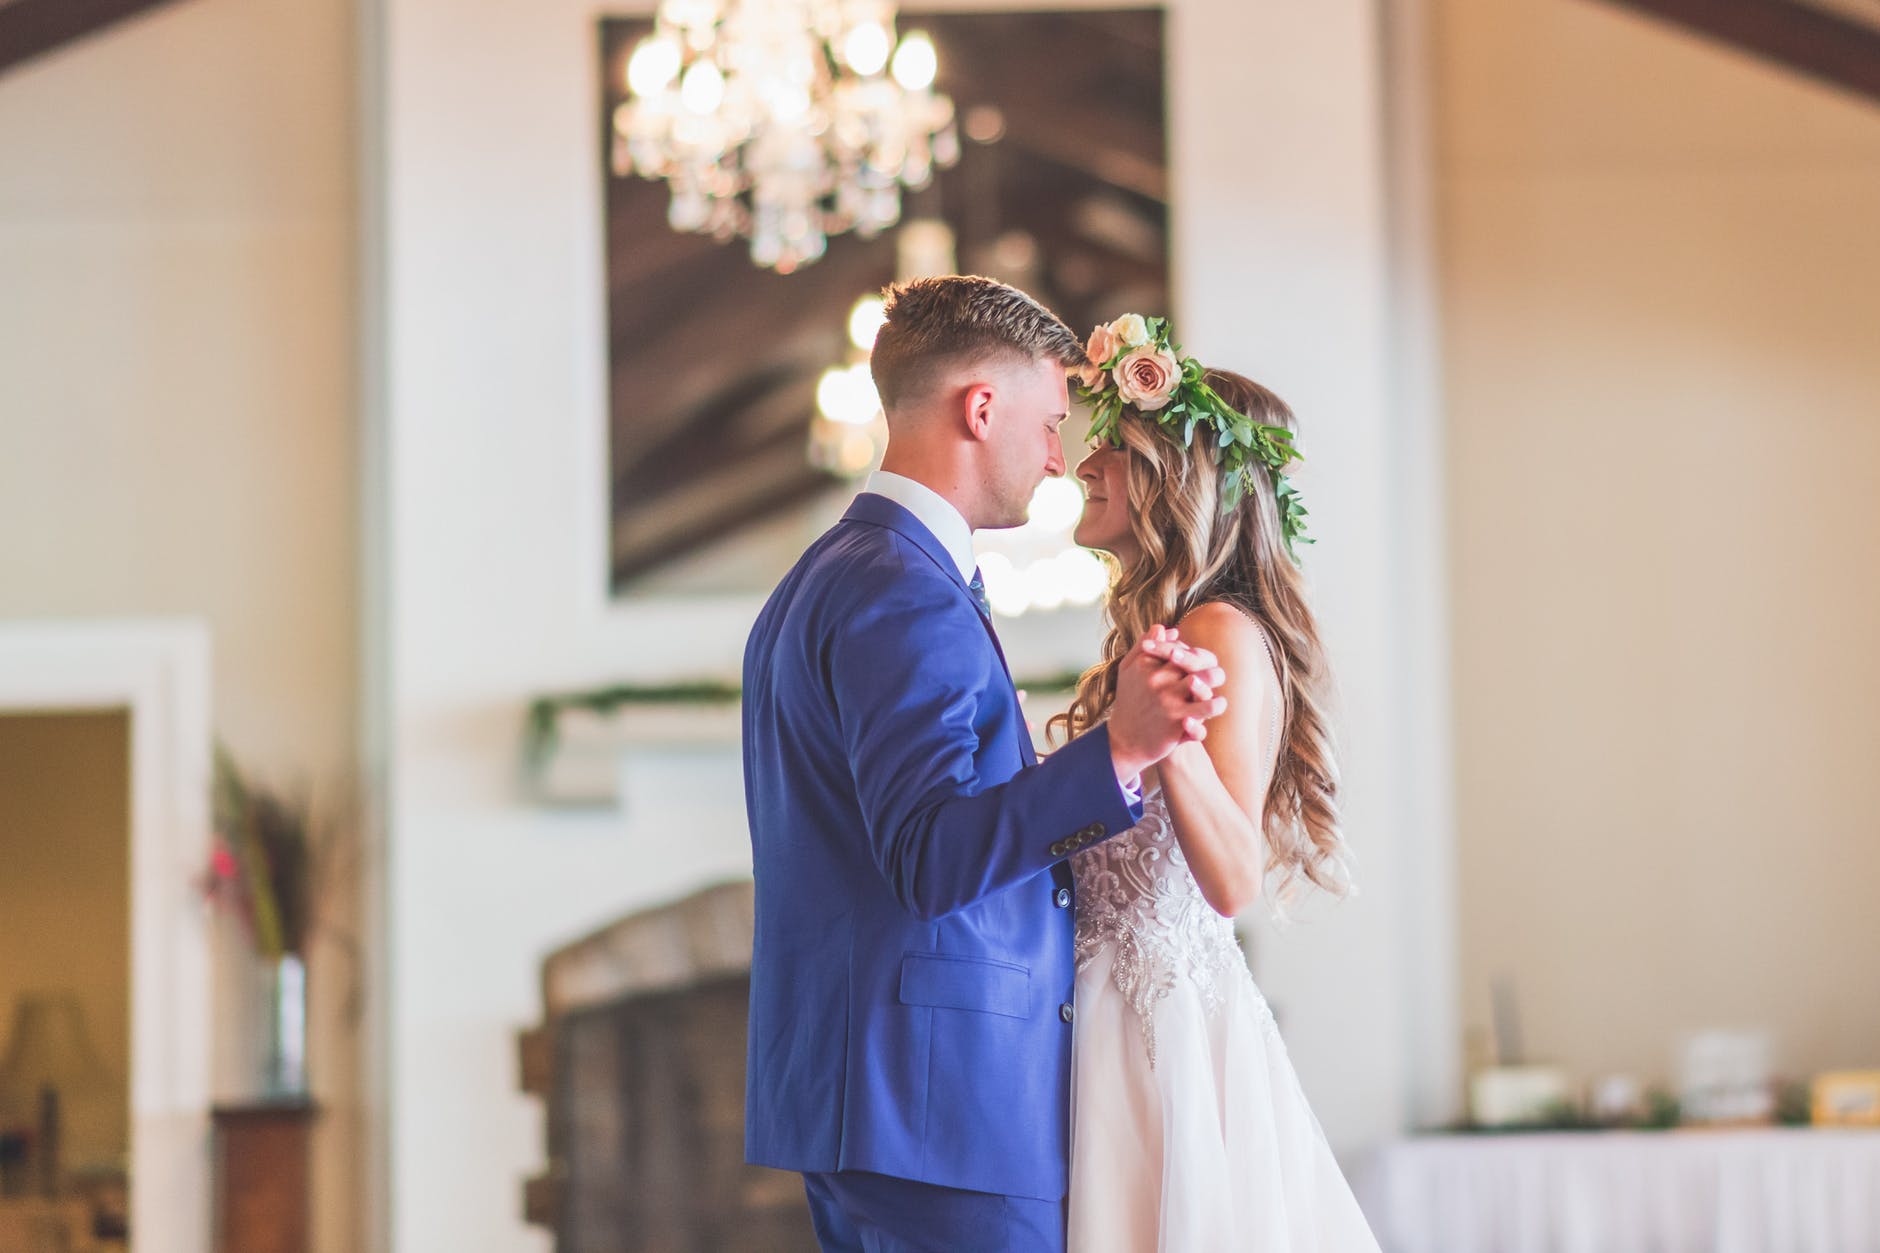 They renewed thier vows. | Source: Pexels